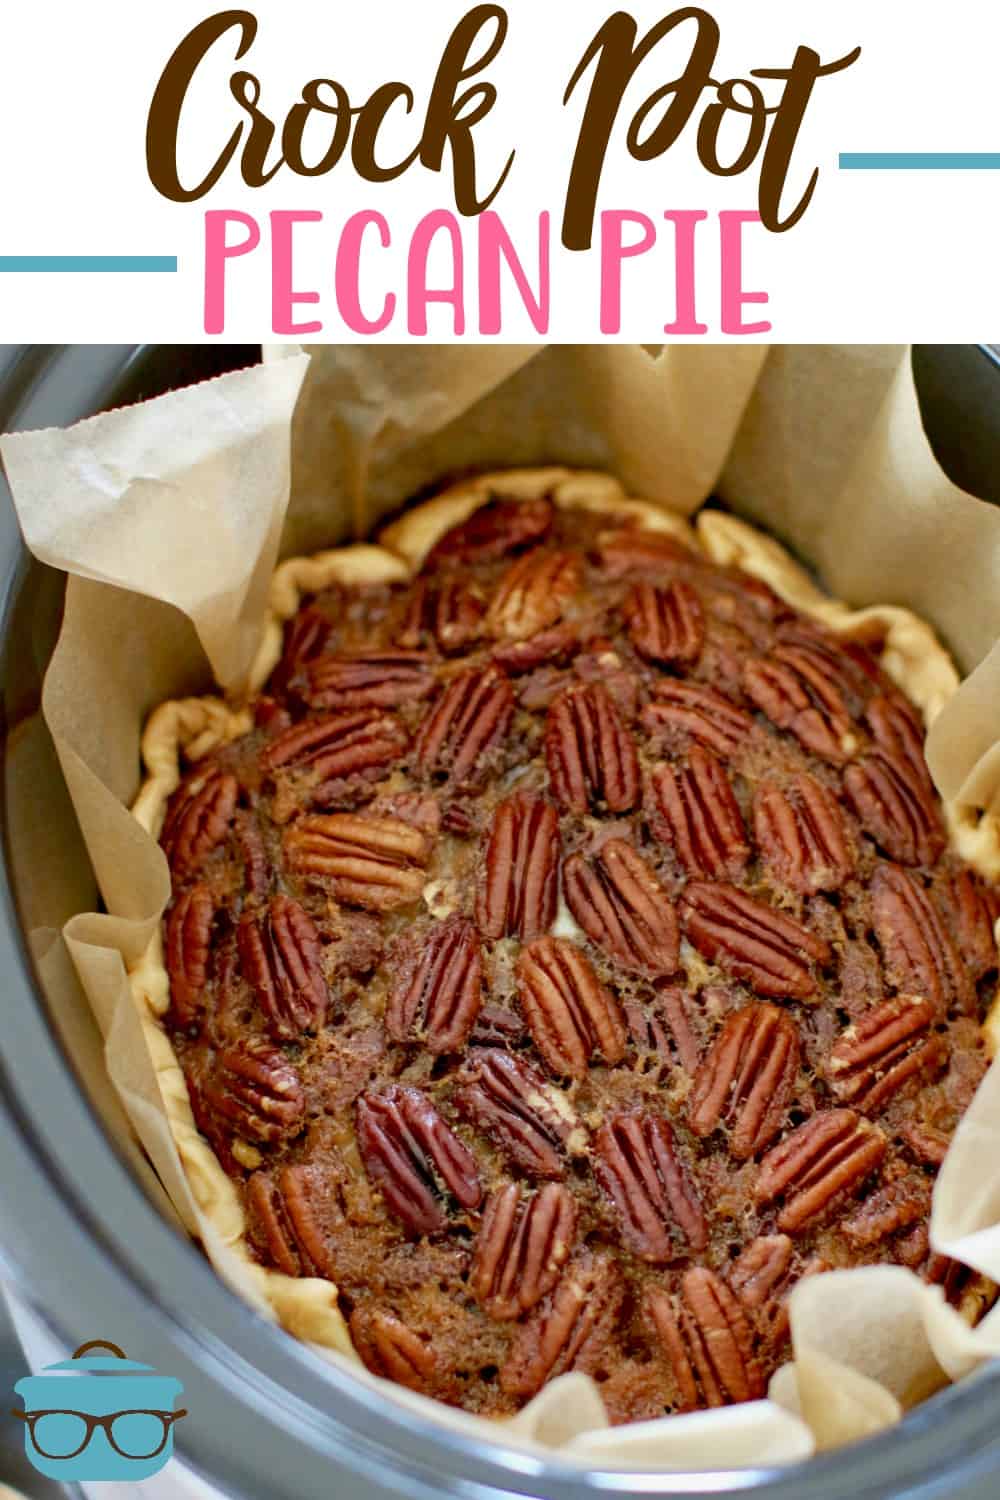 Slow Cooker Pecan Pie recipe from The Country Cook. Fully baked pie shown inside an oval slow cooker.